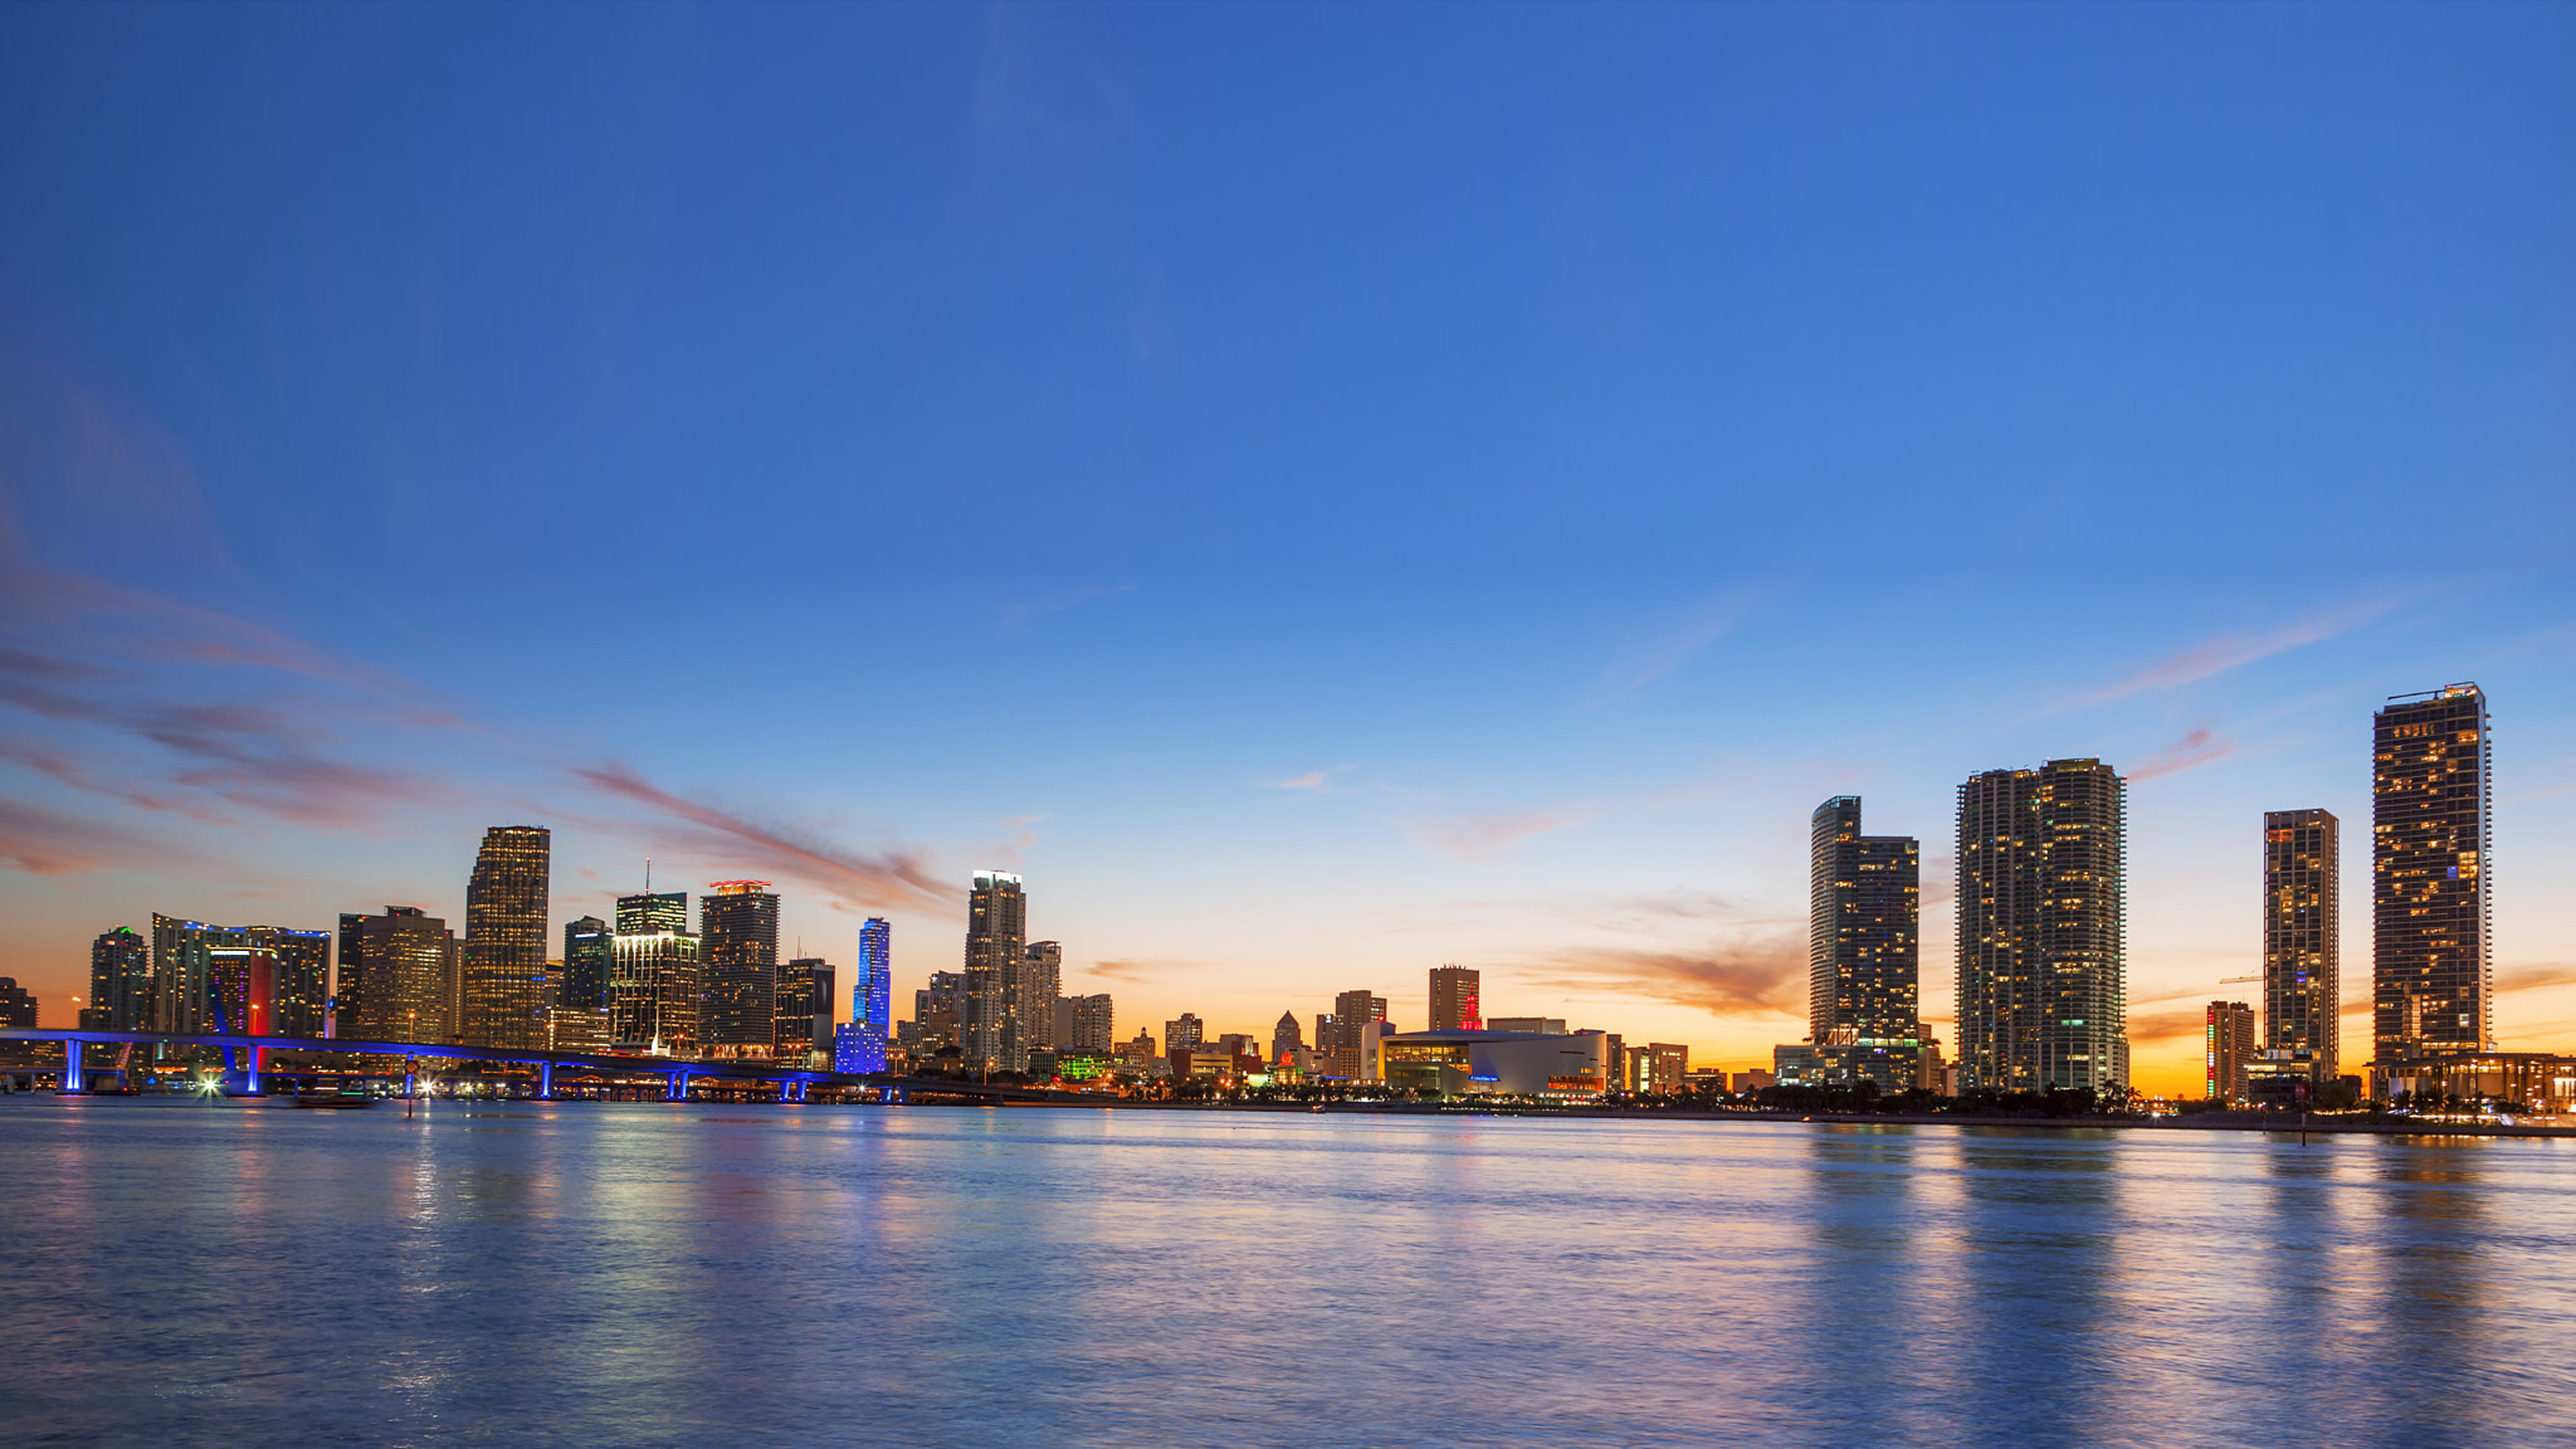 3840x2160 City In Florida Usa Miami At Sunset Panorama 4k Ultra Hd Wallpaper For  Desktop Laptop Tablet Mobile Phones And Tv 3840Ã2160